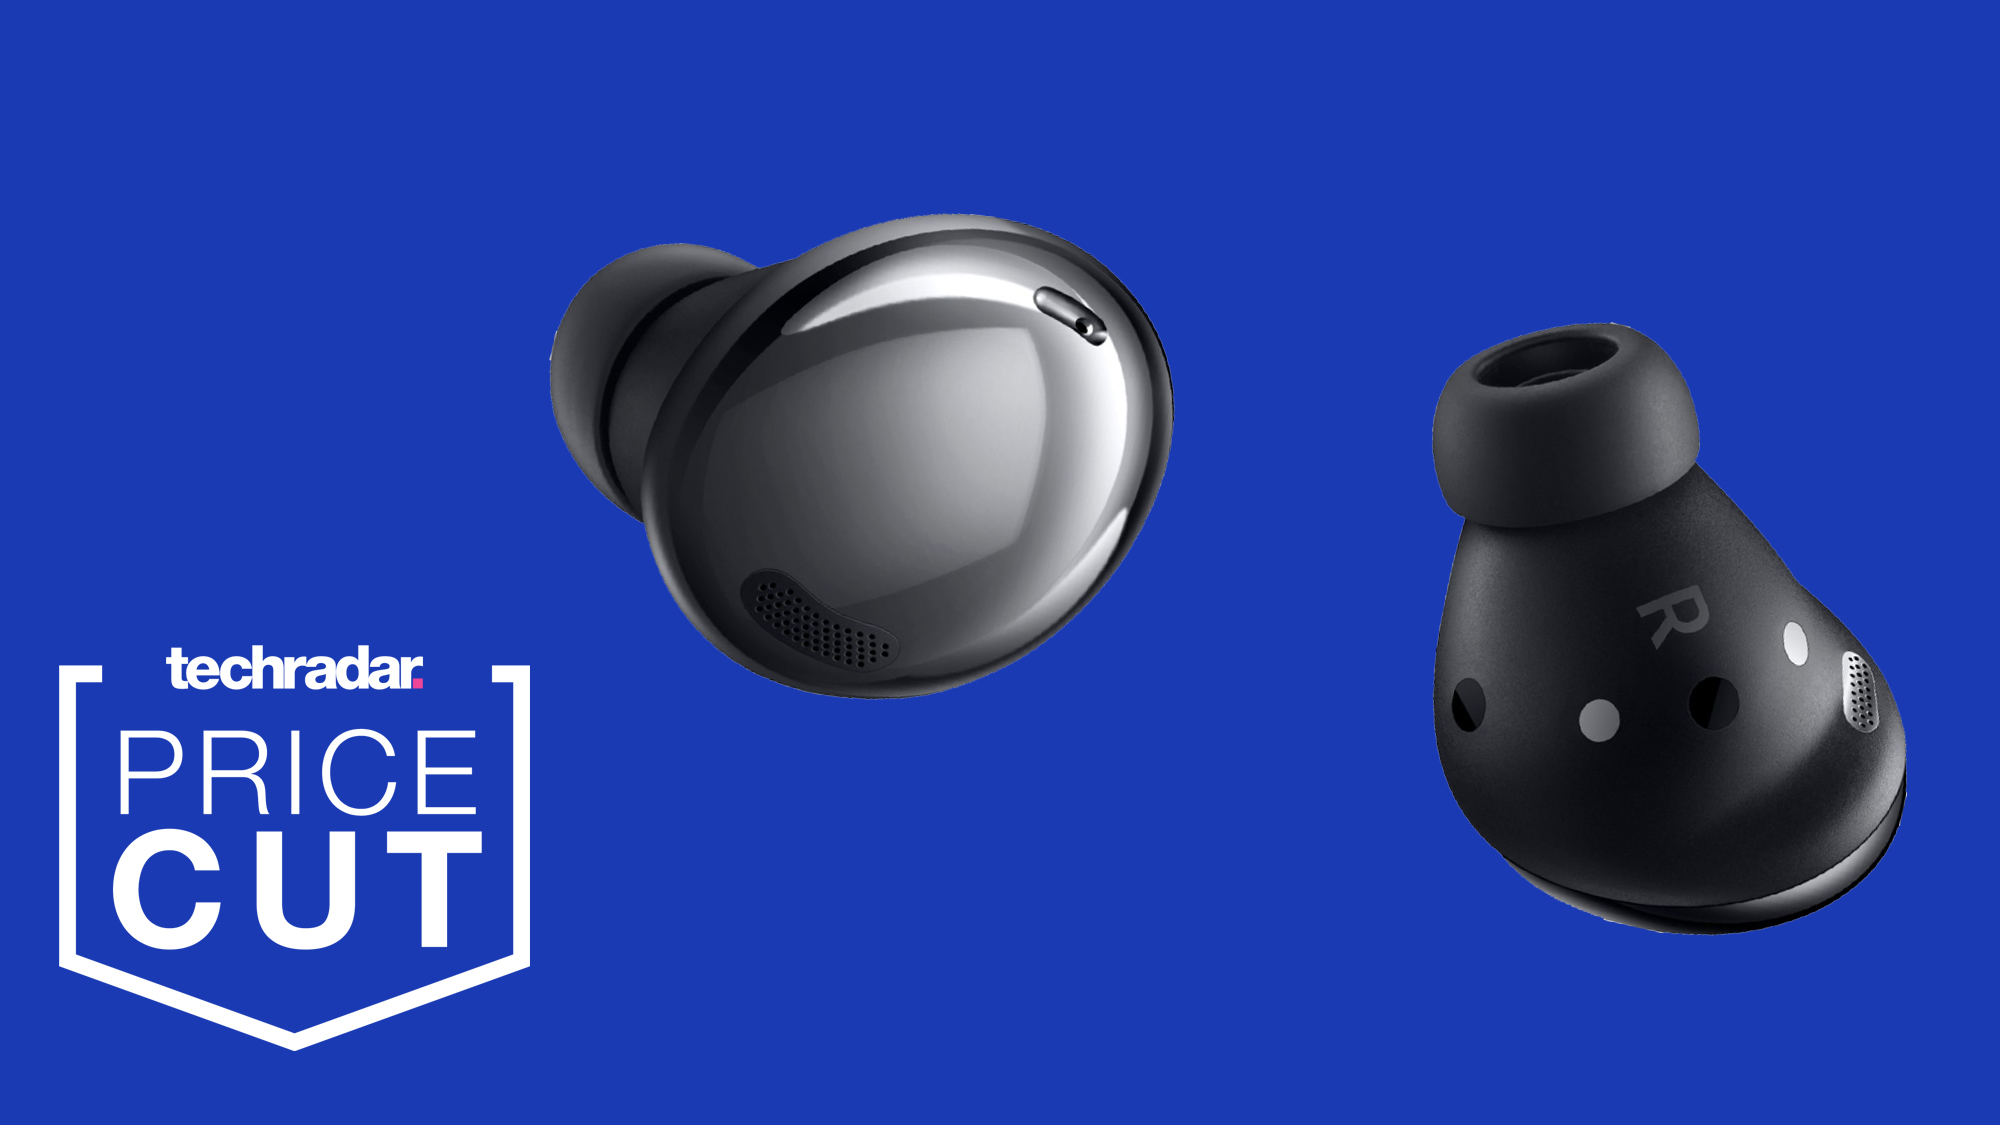 Samsung Galaxy Buds Pro after Christmas sale